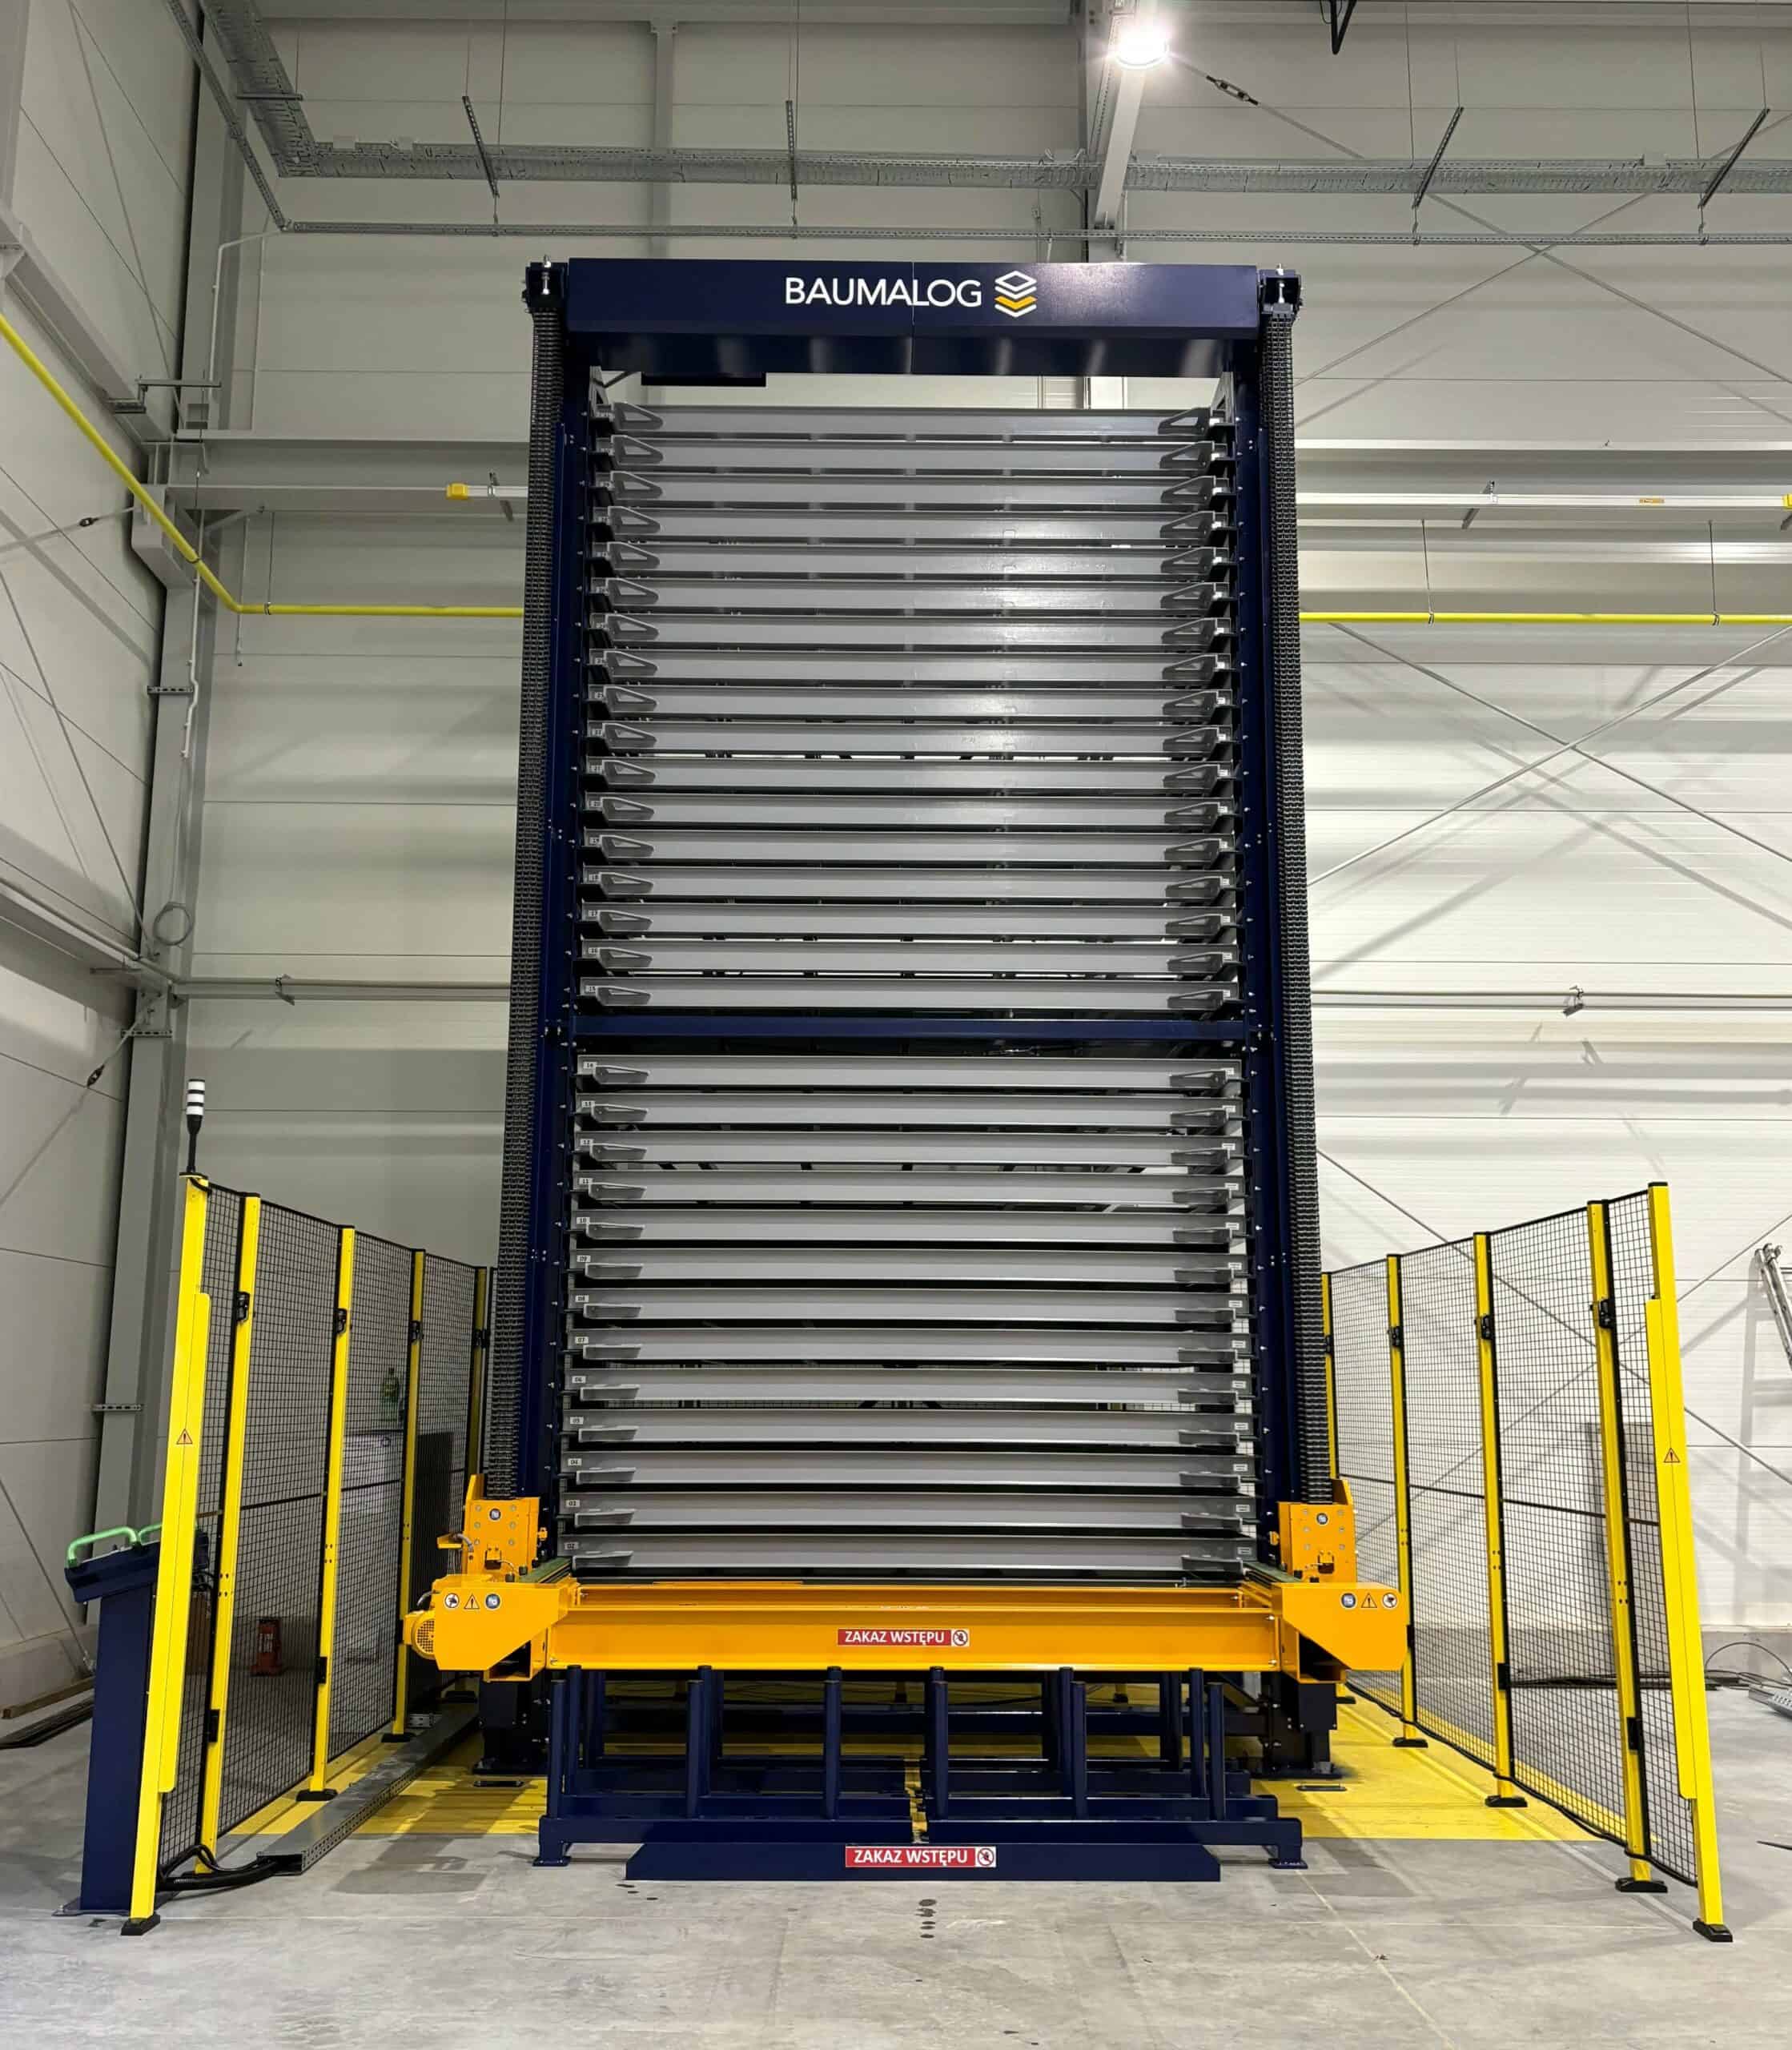 MonoTower automated racking system